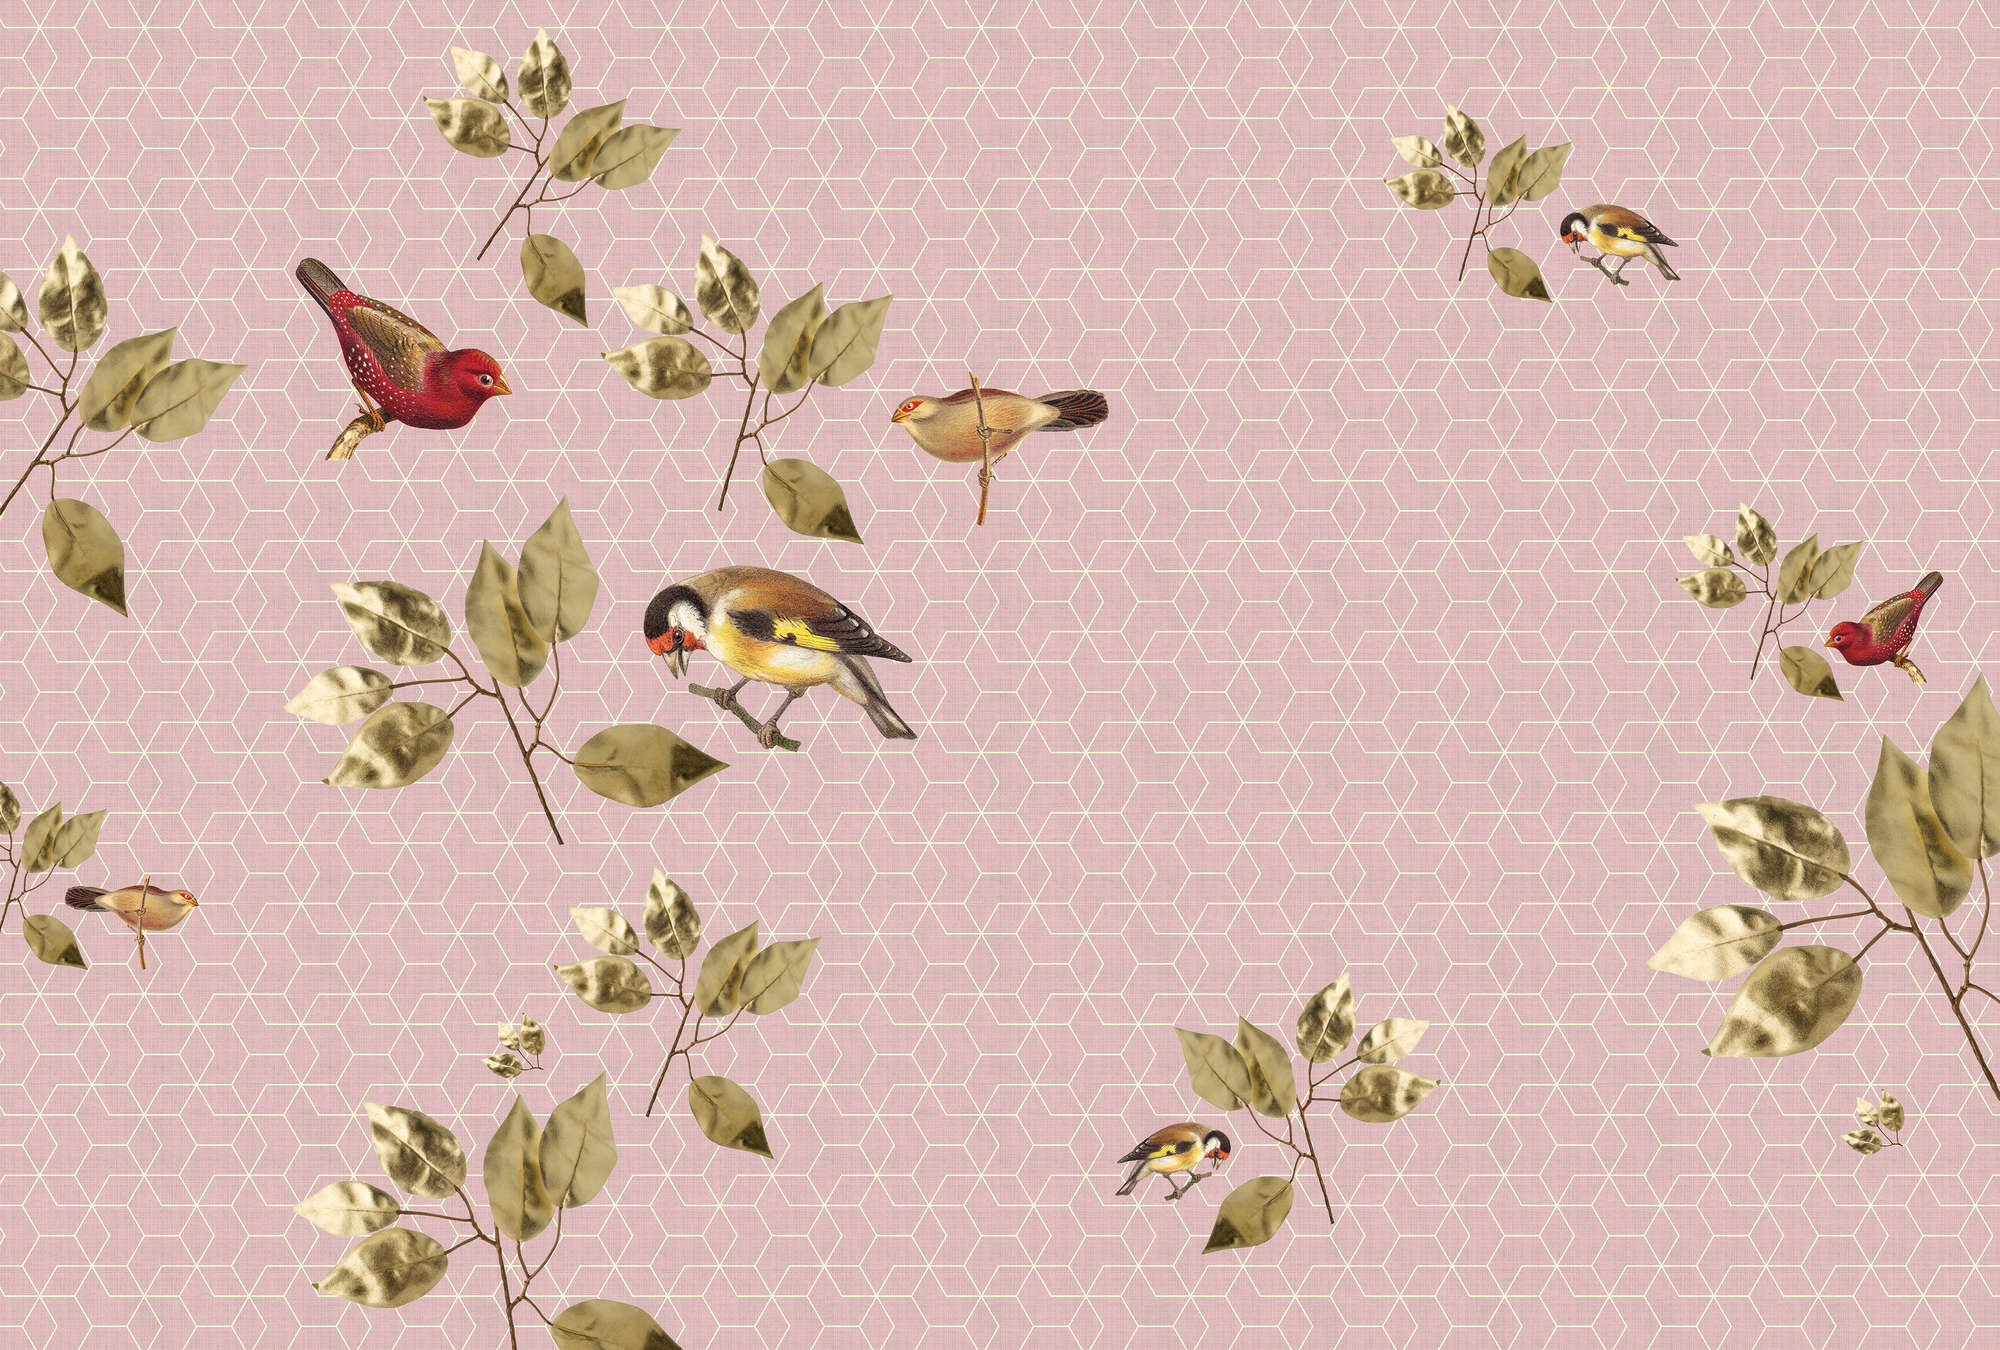             Brilliant Birds 1 - Geometric Wallpaper with Birds & Leaves Pattern - Green, Pink | Pearl Smooth Non-woven
        